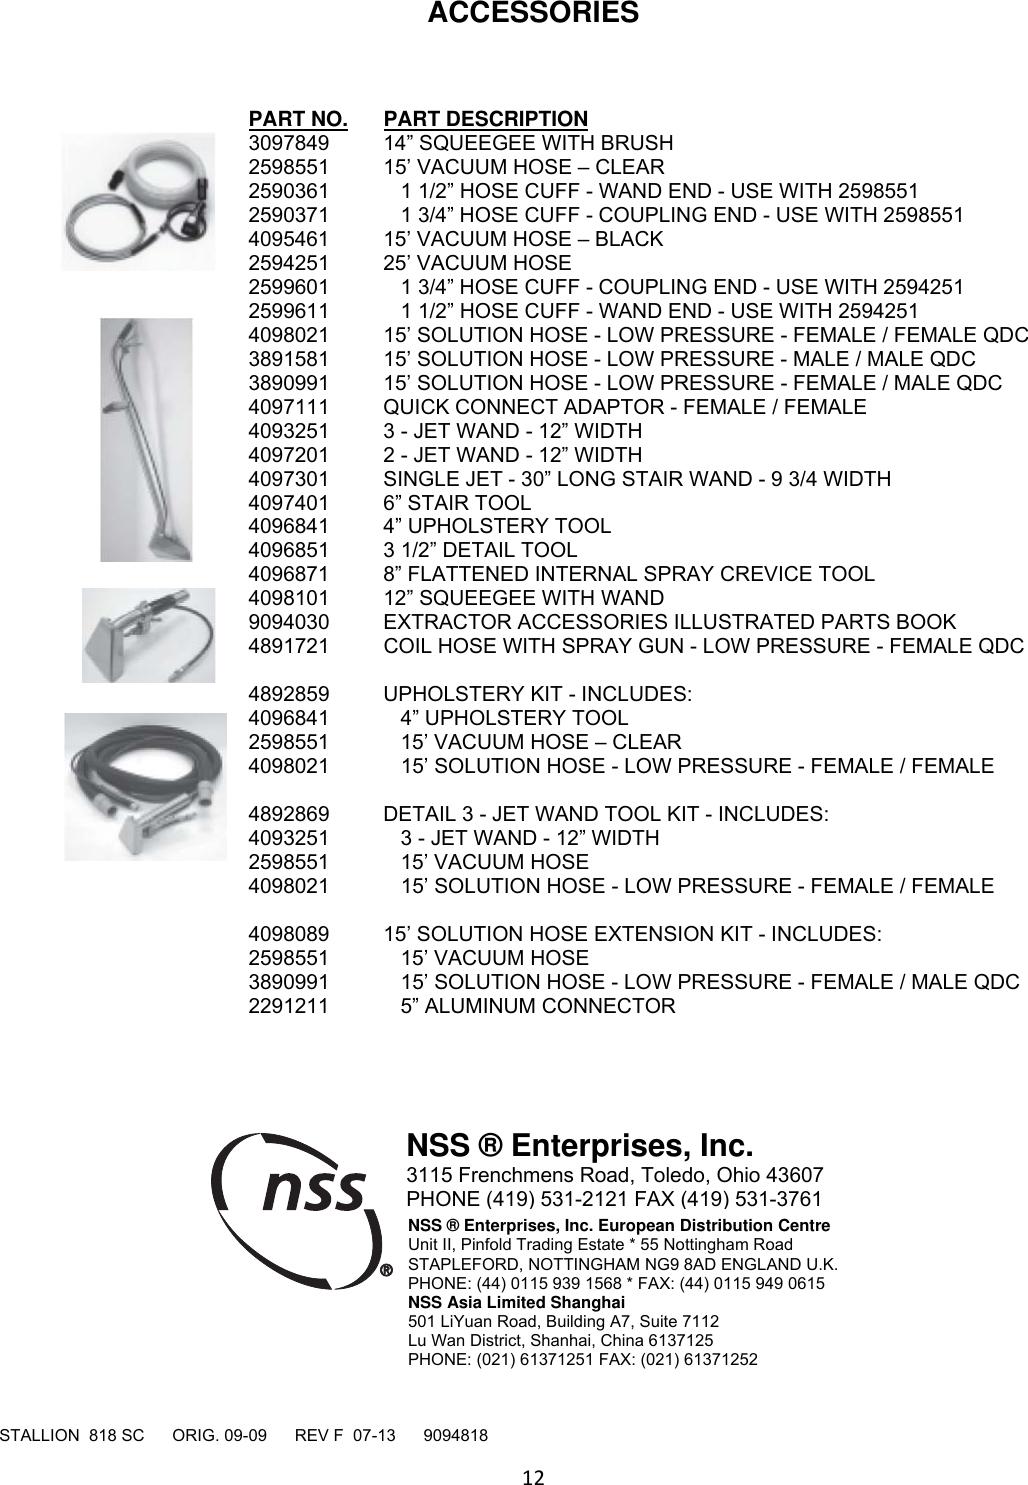 Page 12 of 12 - 9094818 Stallion 818 SC Illustrated Parts Book  Nss-stallion-818sc-carpet-extractor-parts-manual